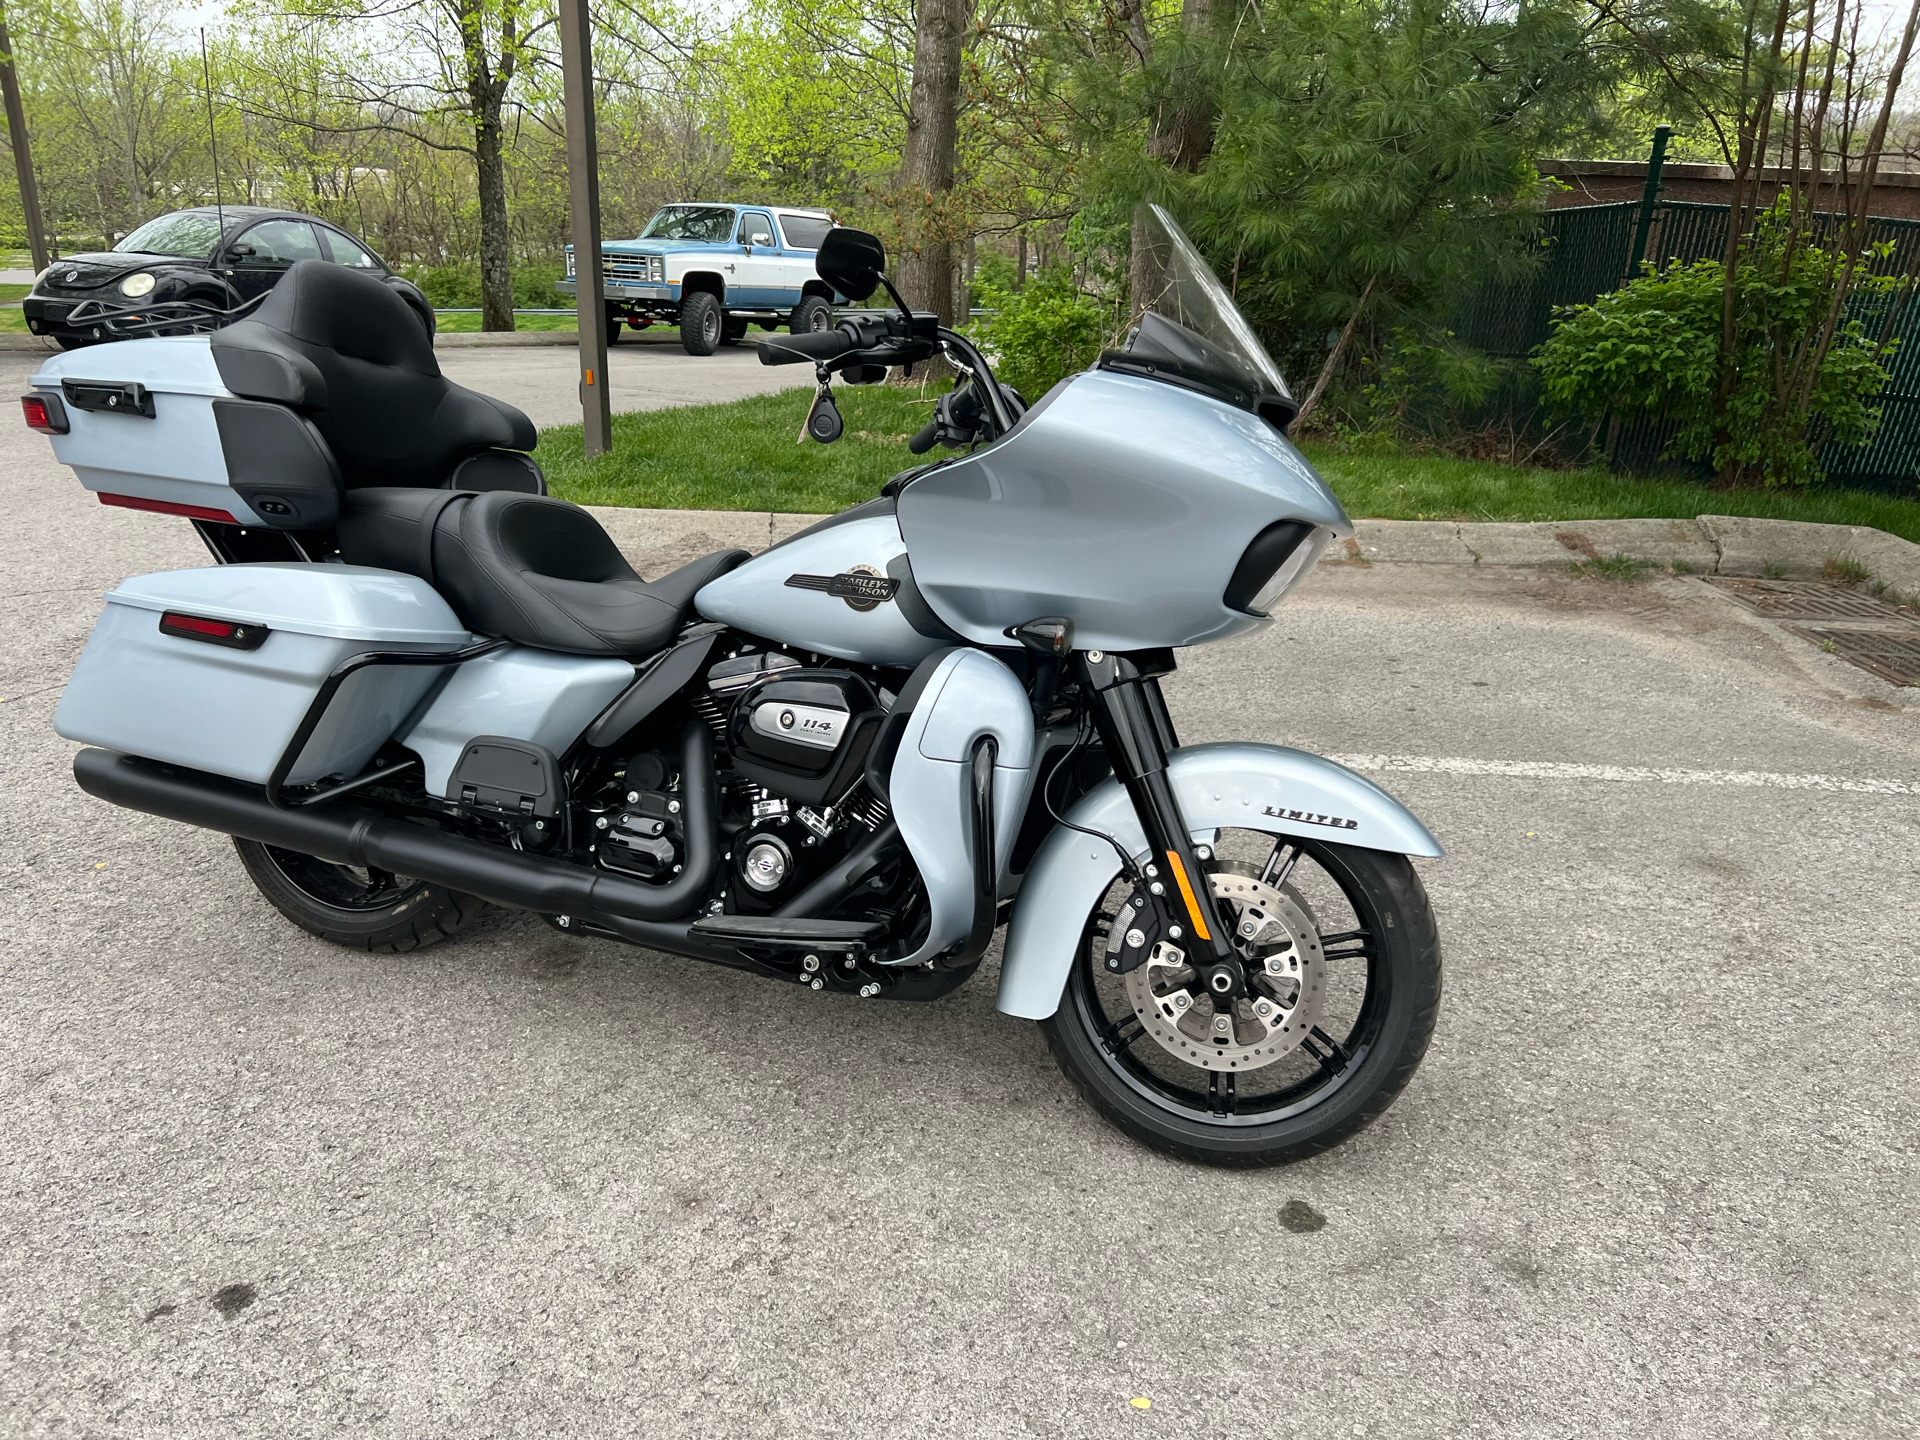 2023 Harley-Davidson Road Glide® Limited in Franklin, Tennessee - Photo 9